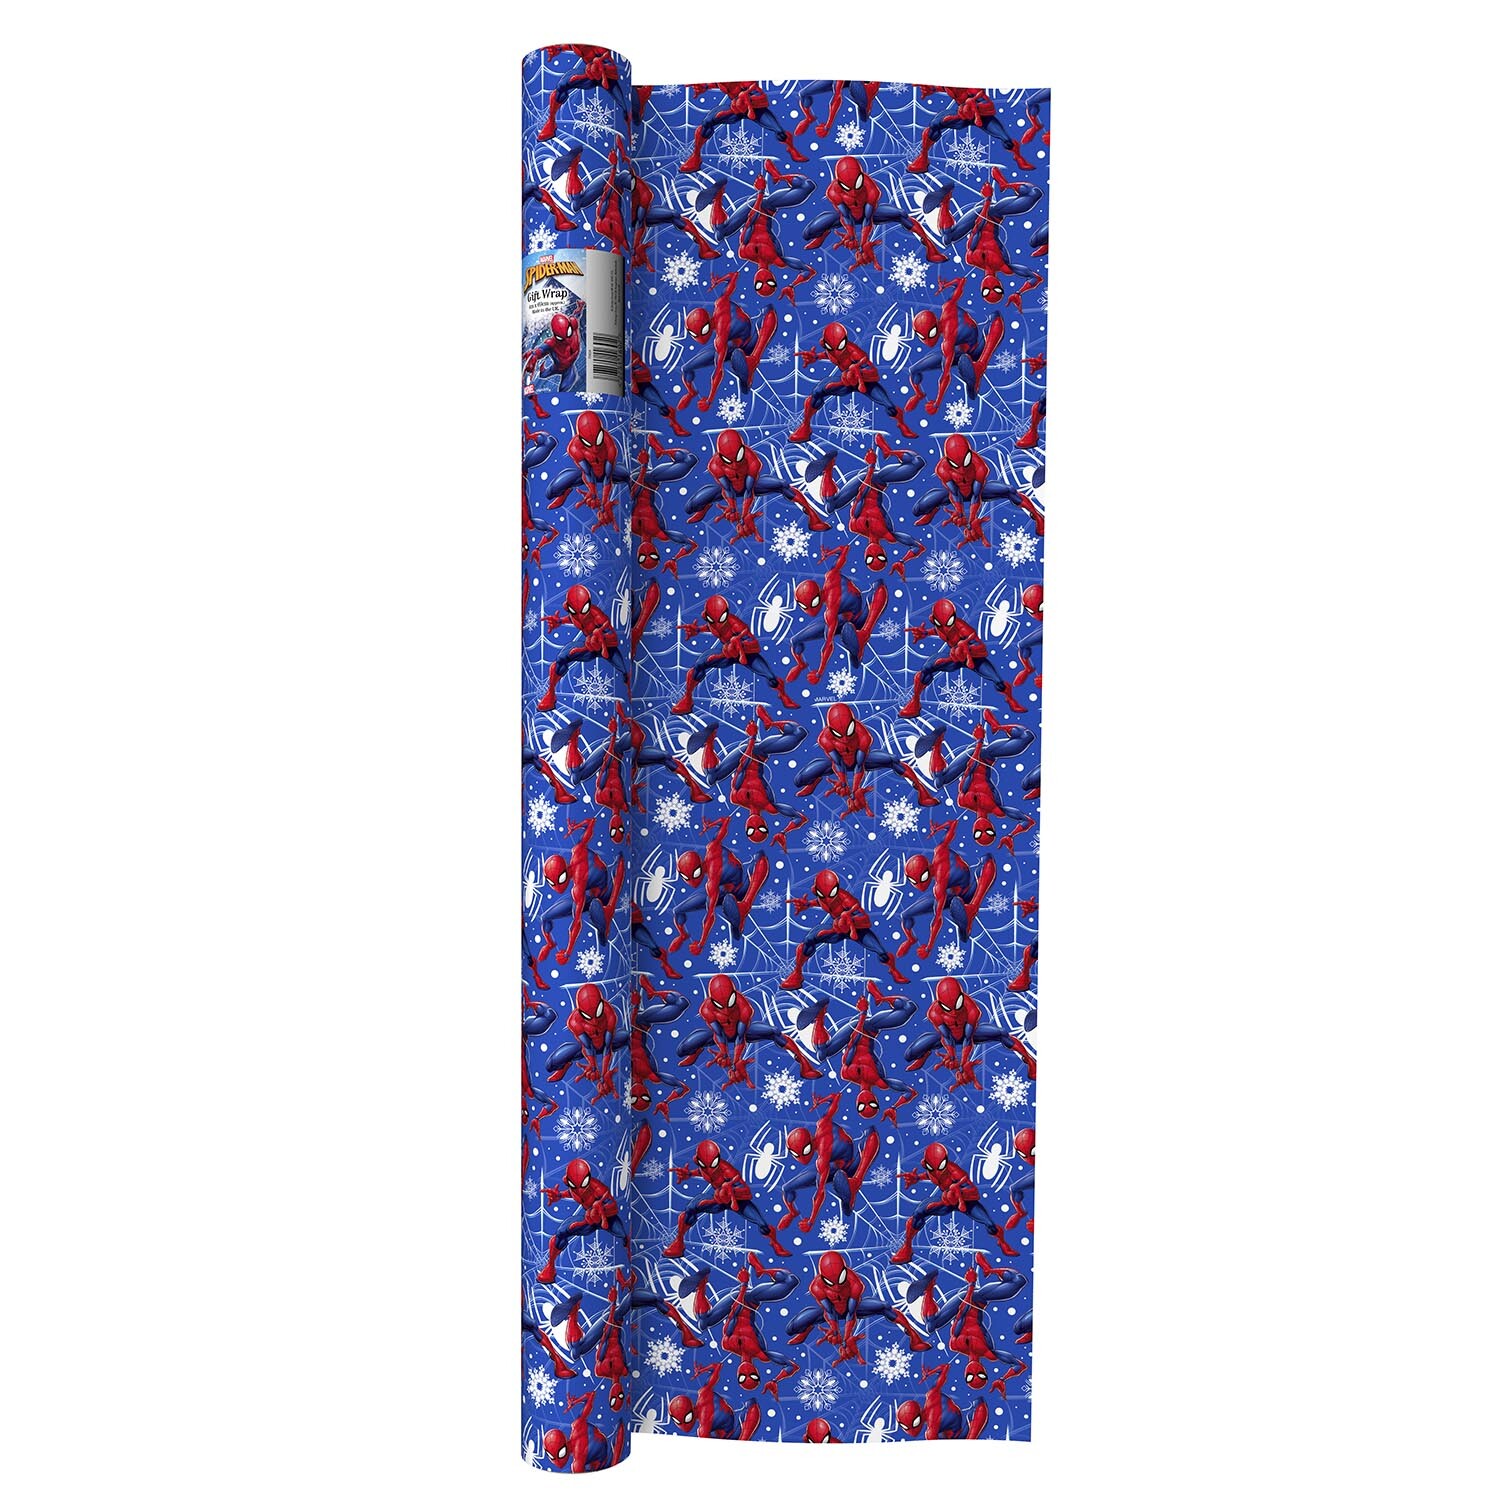 4m Spiderman Wrapping Paper - Blue Image 1